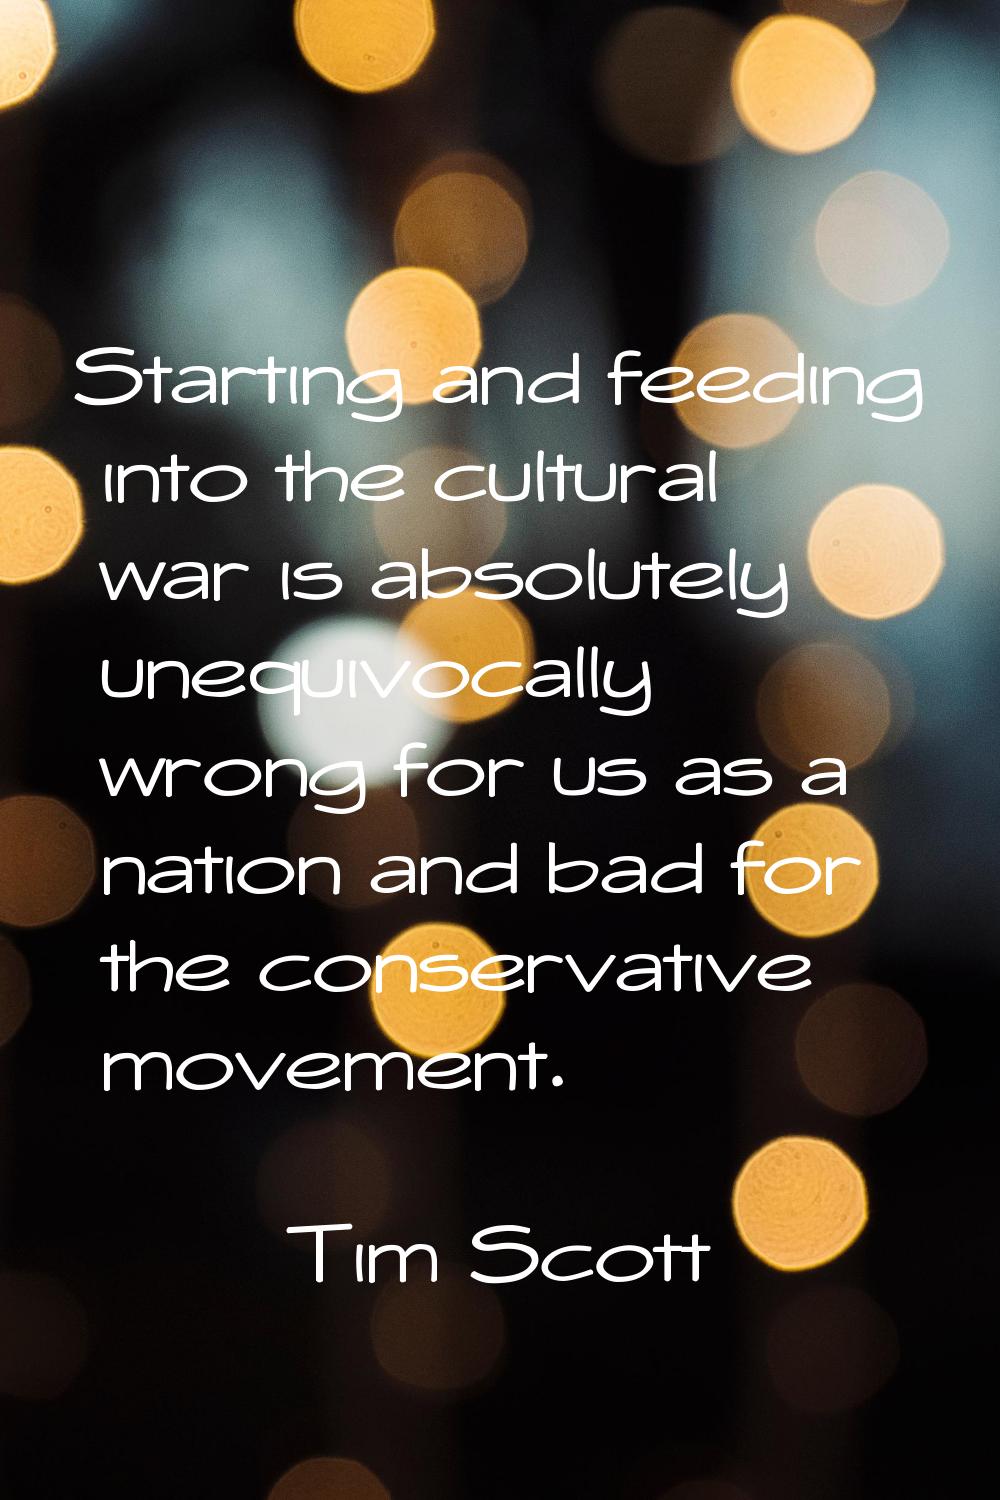 Starting and feeding into the cultural war is absolutely unequivocally wrong for us as a nation and